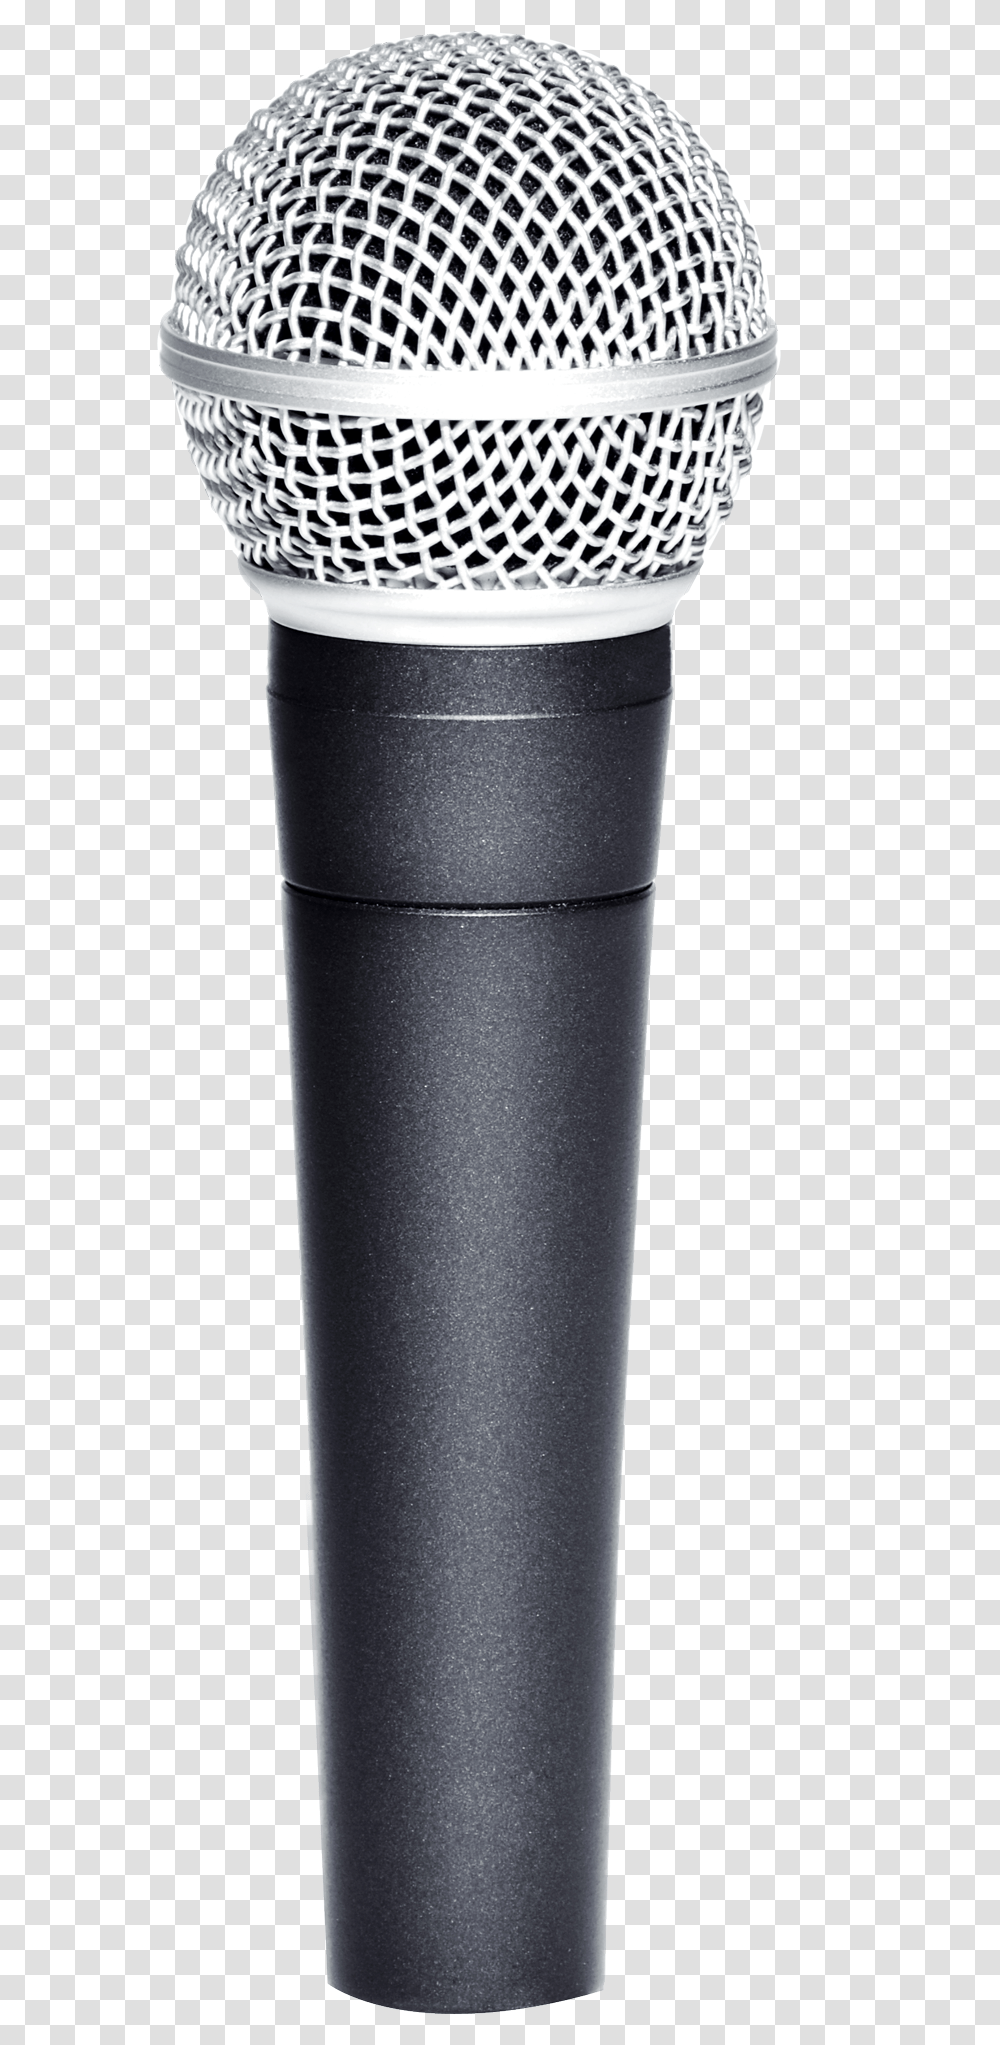 Microphone Images Background Microphone, Shaker, Bottle, Steel, Cup Transparent Png